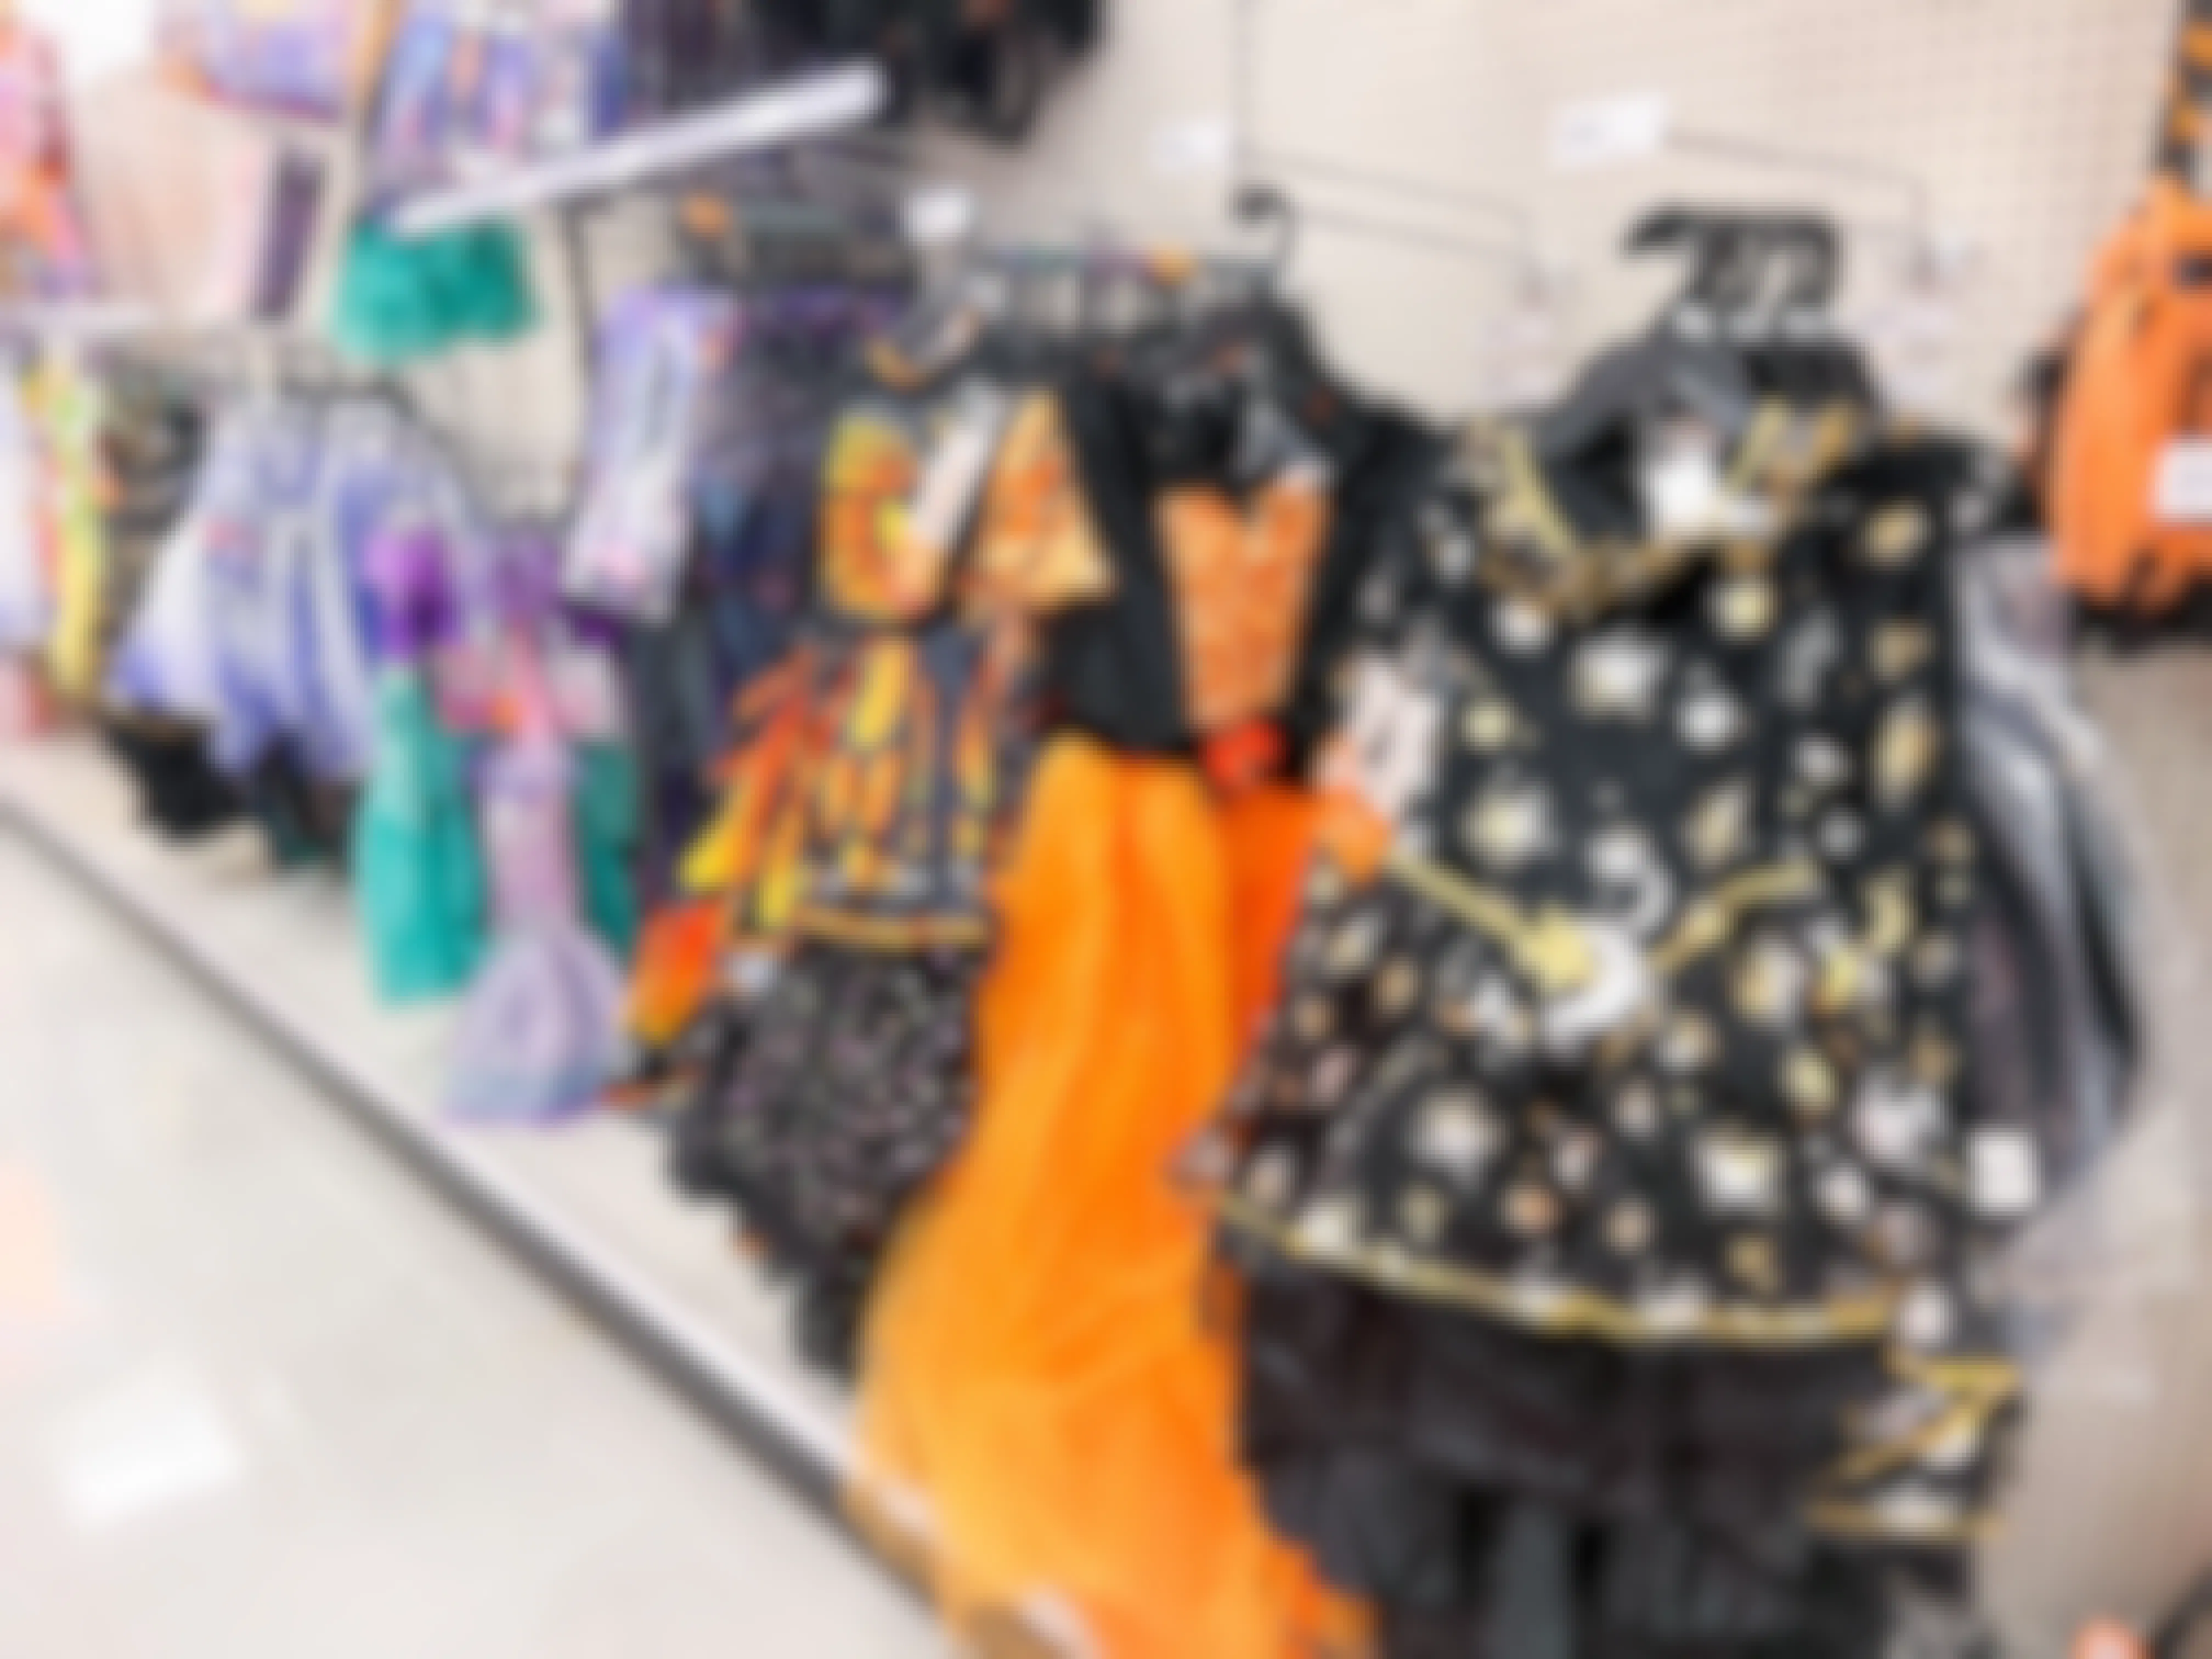 halloween costumes hanging in an aisle